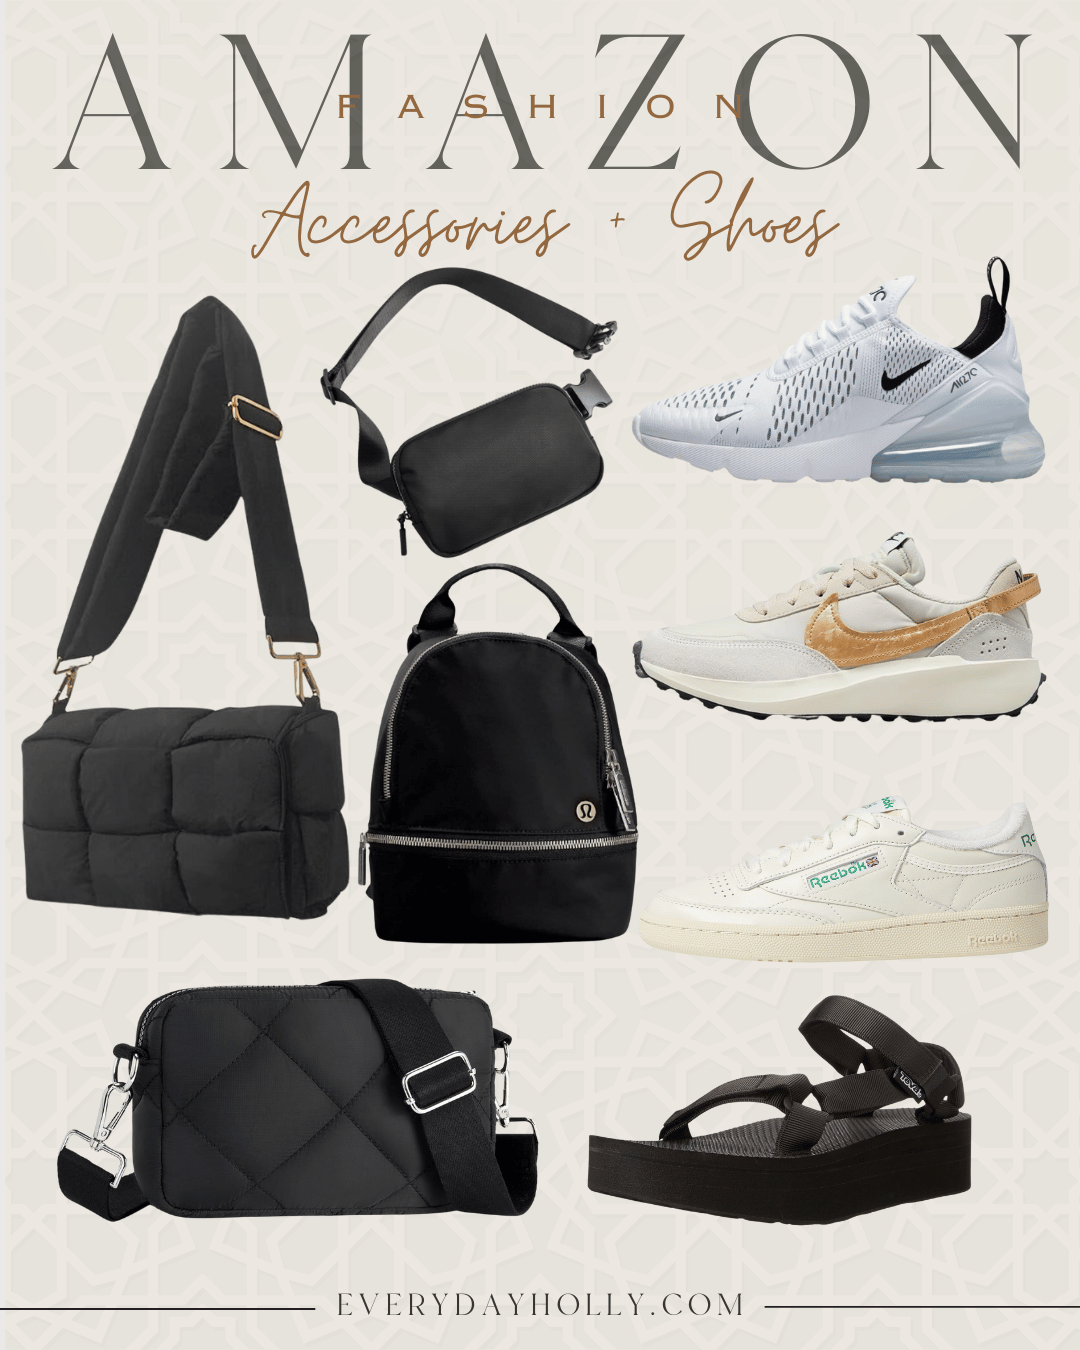 new and trending activewear + athleisure styles amazon | activewear, athleisure, workout clothes, gym outfit, gym clothes, amazon fashion,  accessories, shoes, belt bag, nike, sneakers, reebok, sandals